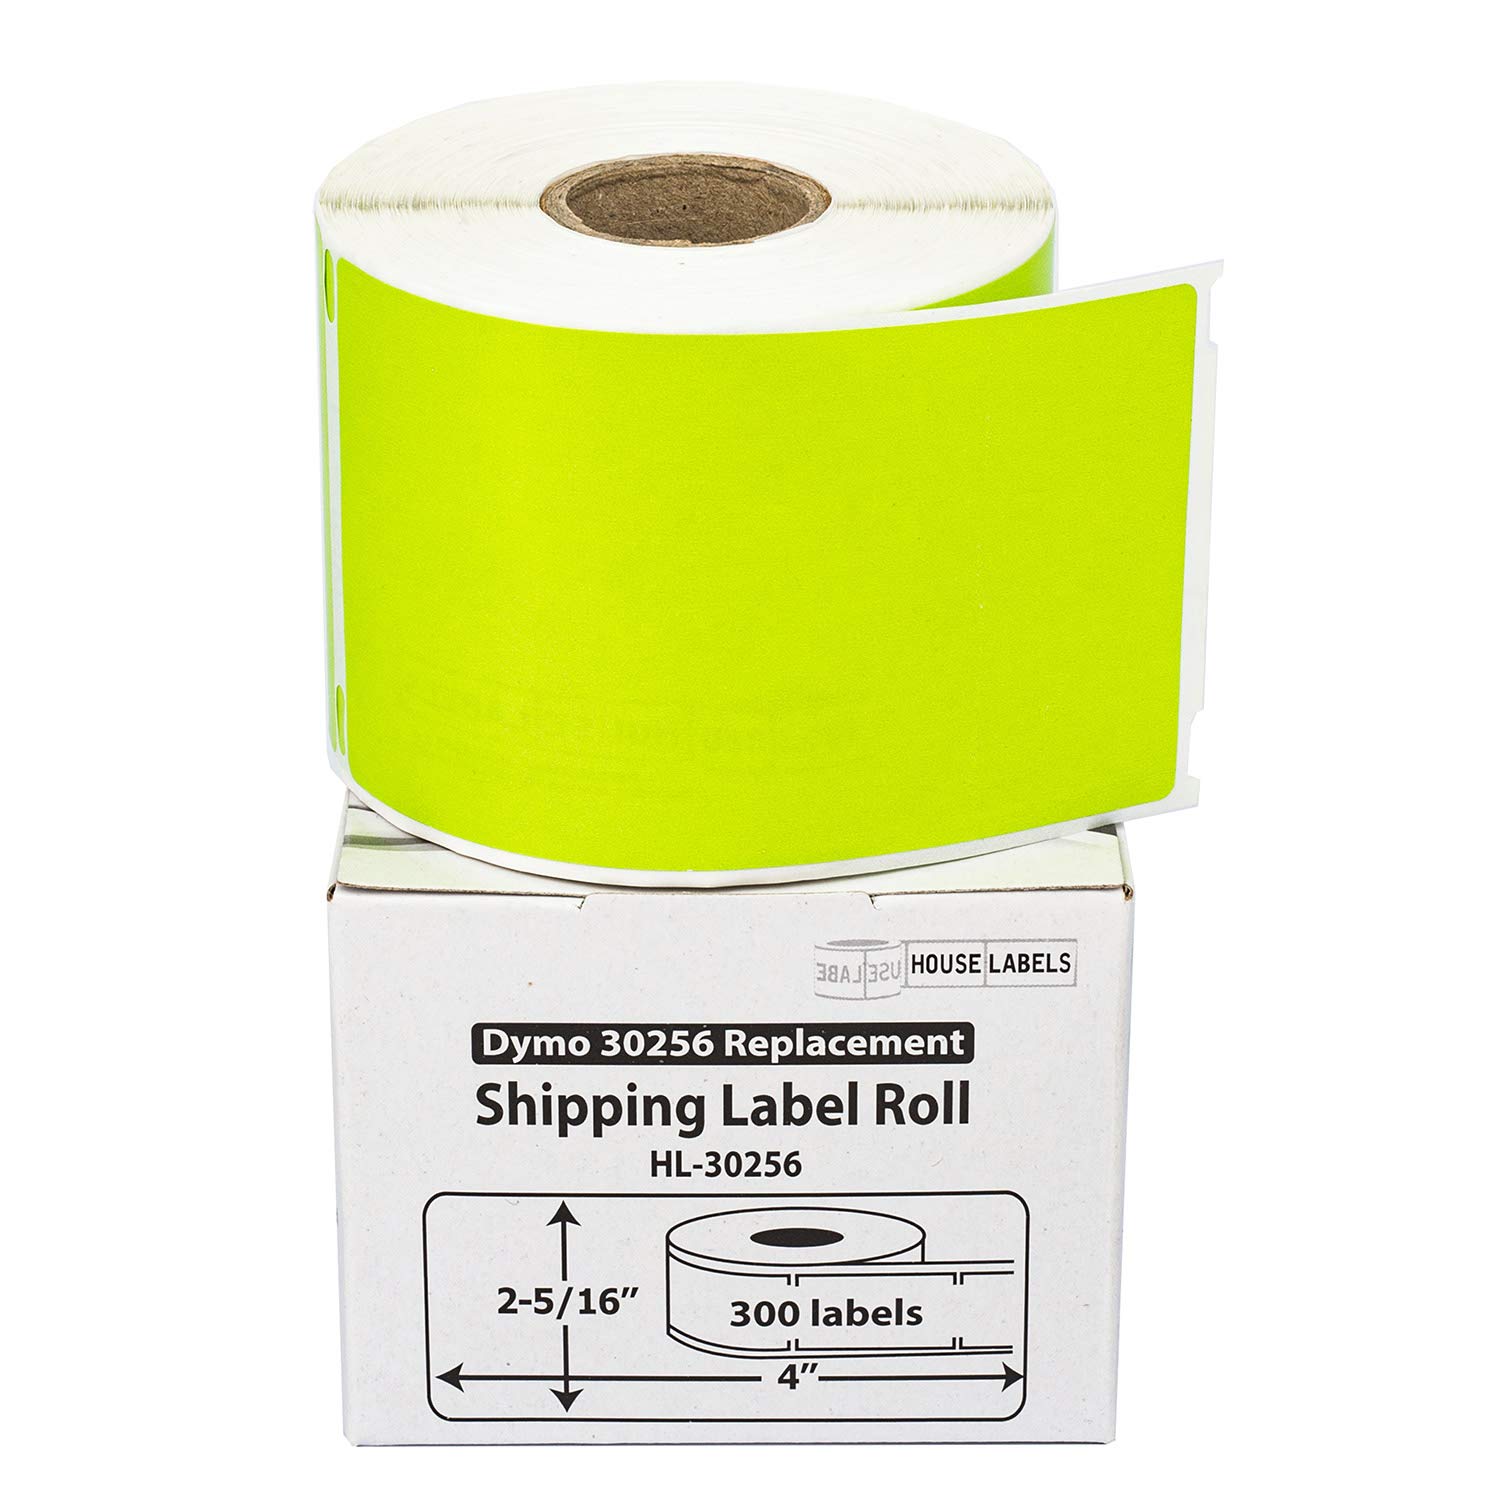 HOUSELABELS Compatible DYMO 30256 Green Shipping Labels (2-5/16" x 4") Compatible with Rollo, DYMO LW Printers, 25 Rolls / 300 Labels per Roll